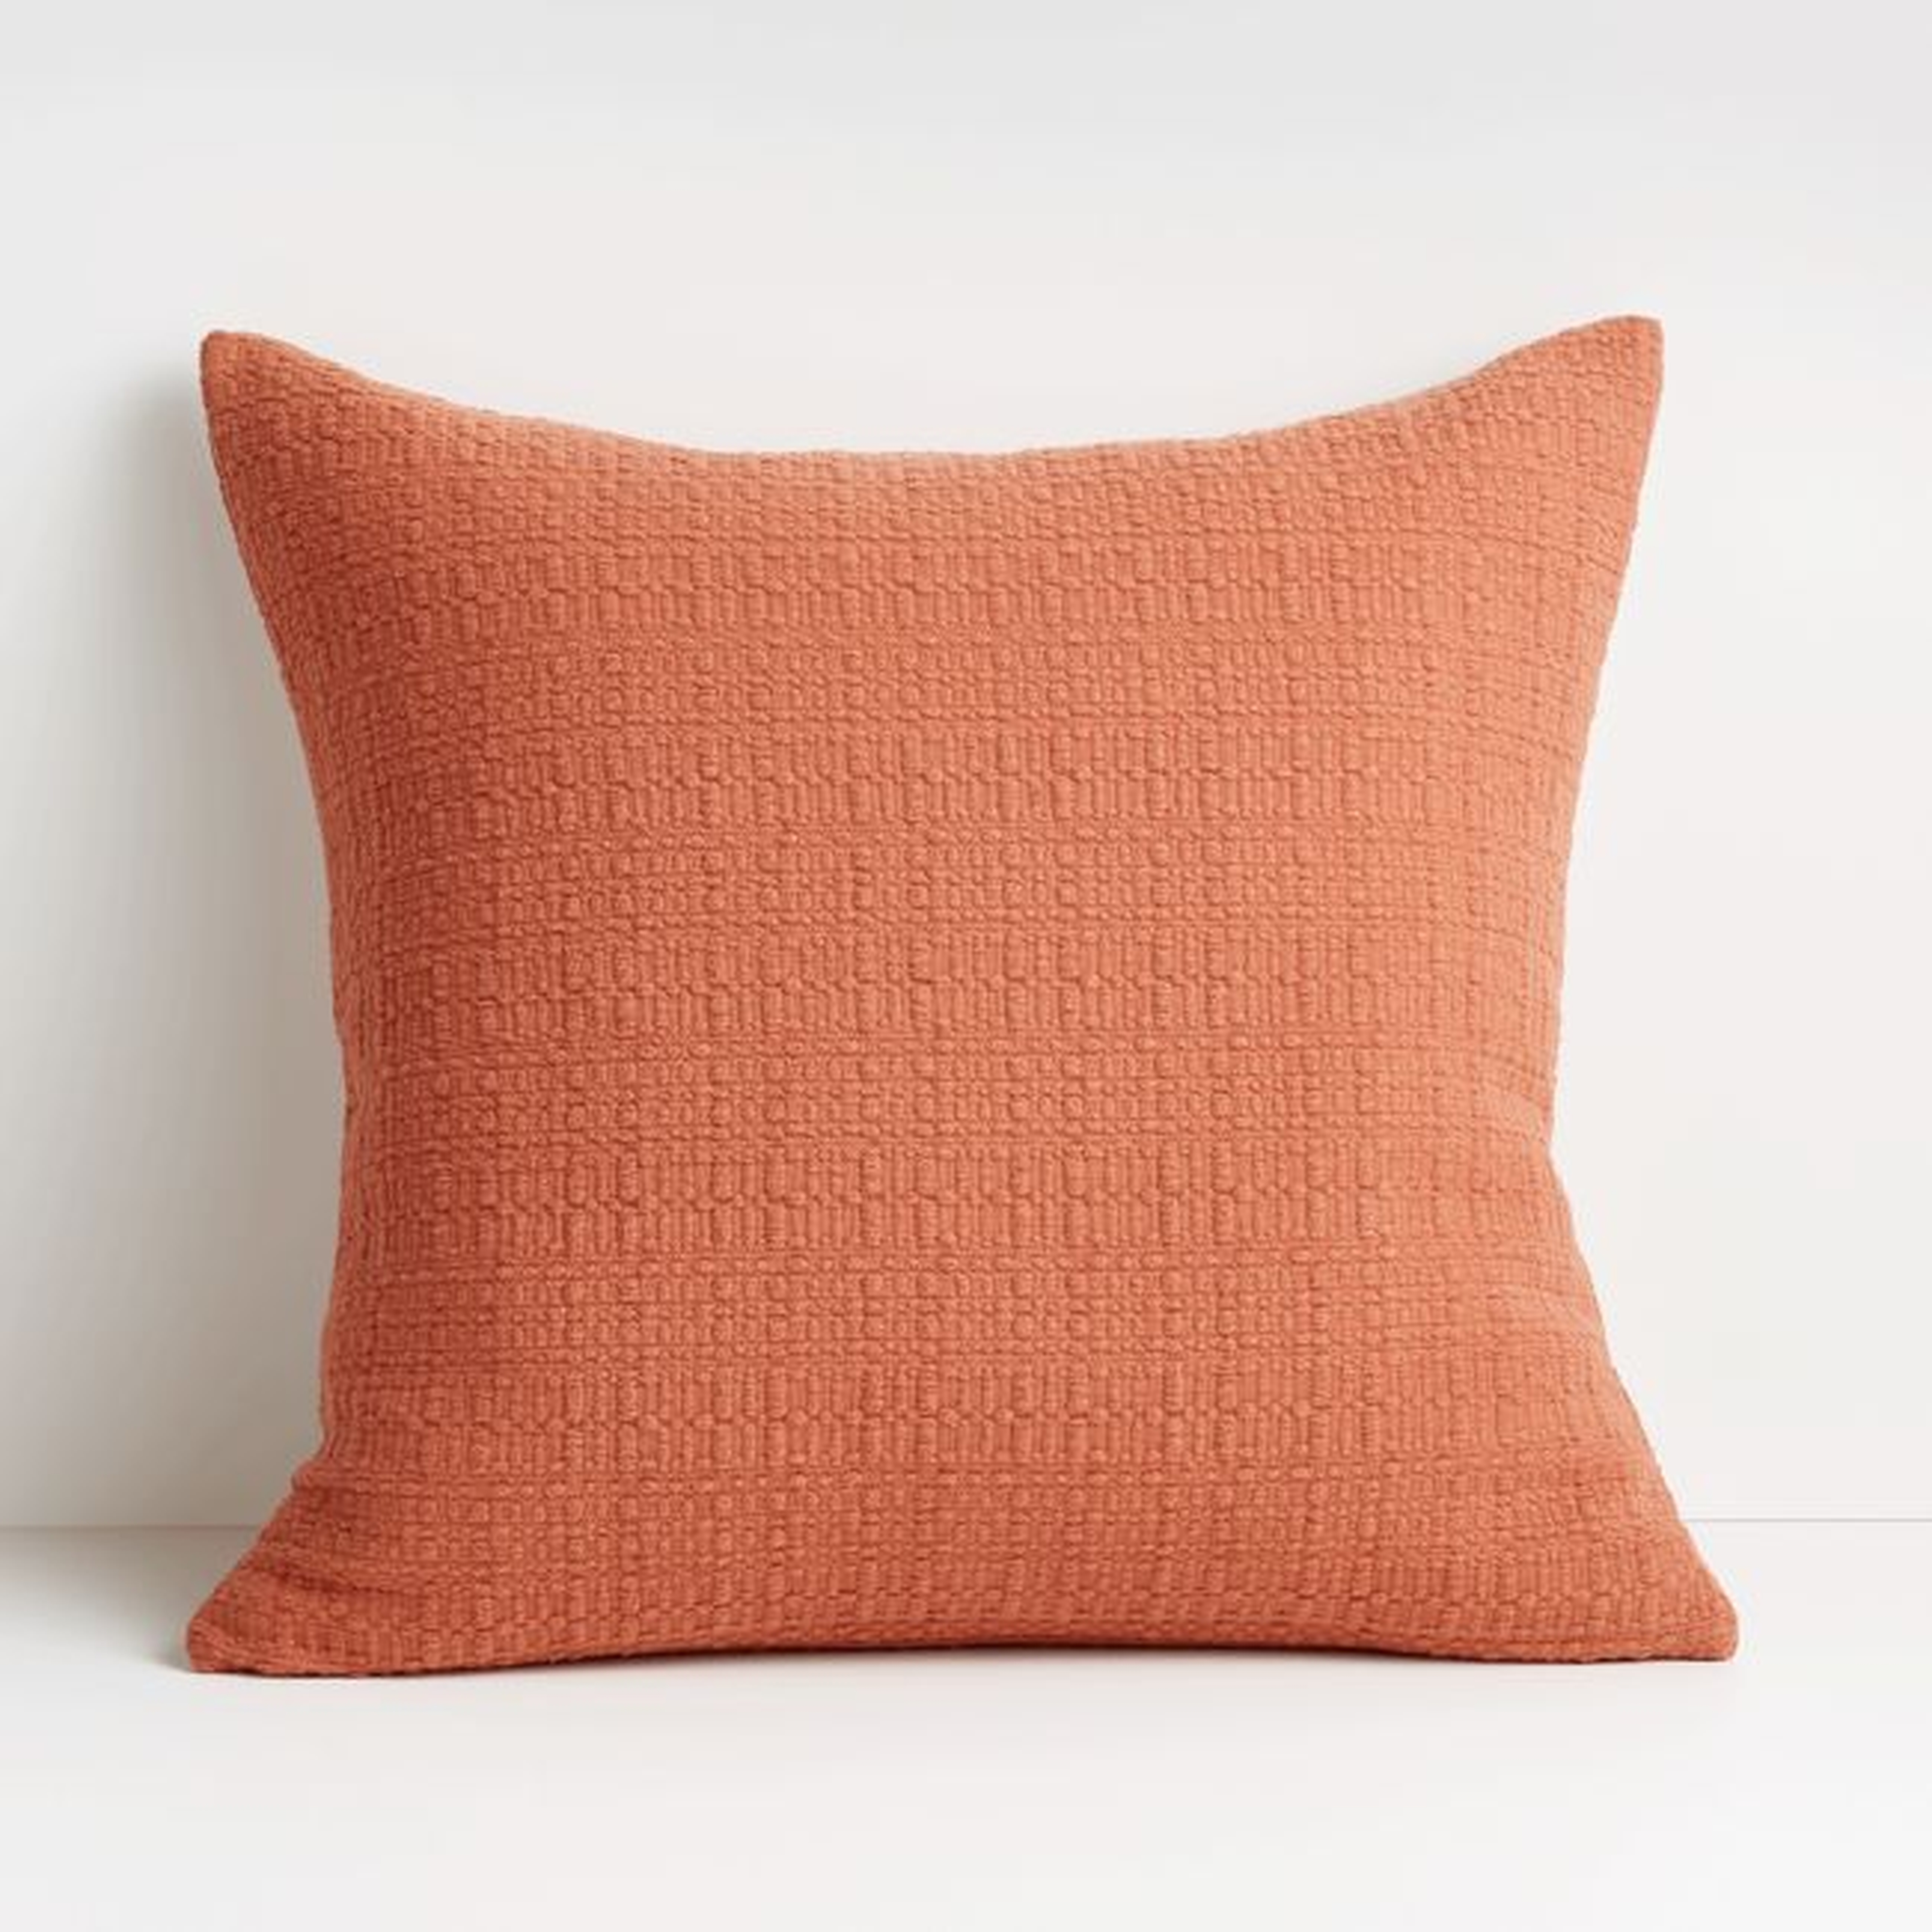 Bari 20" Baked Clay Knitted Pillow with Feather-Down Insert - Crate and Barrel